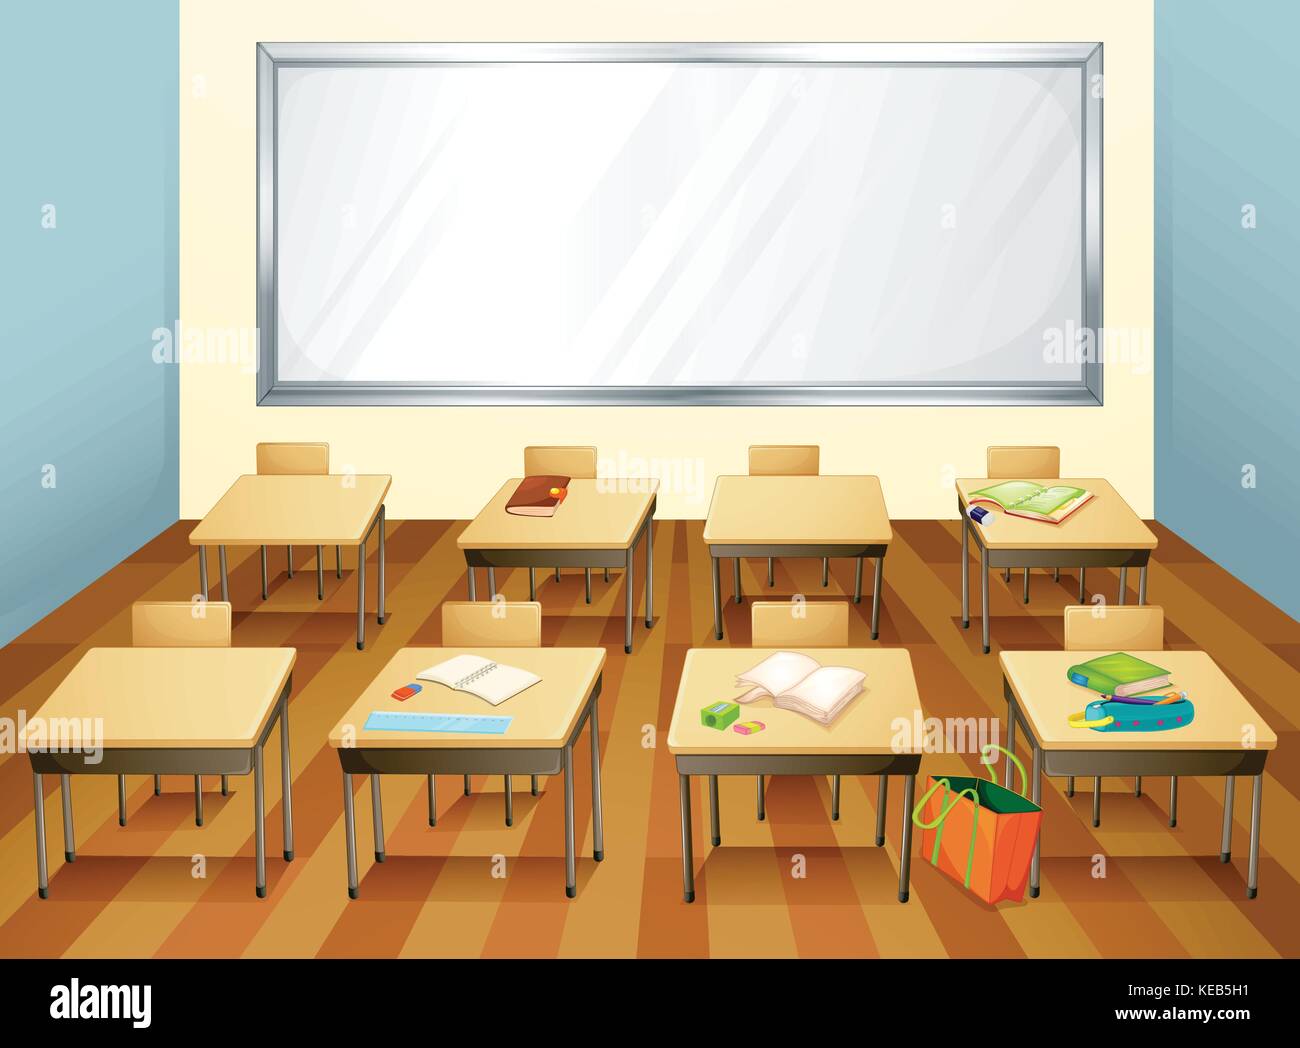 Empty Classroom With Stationary On The Desks Stock Vector Image And Art Alamy 